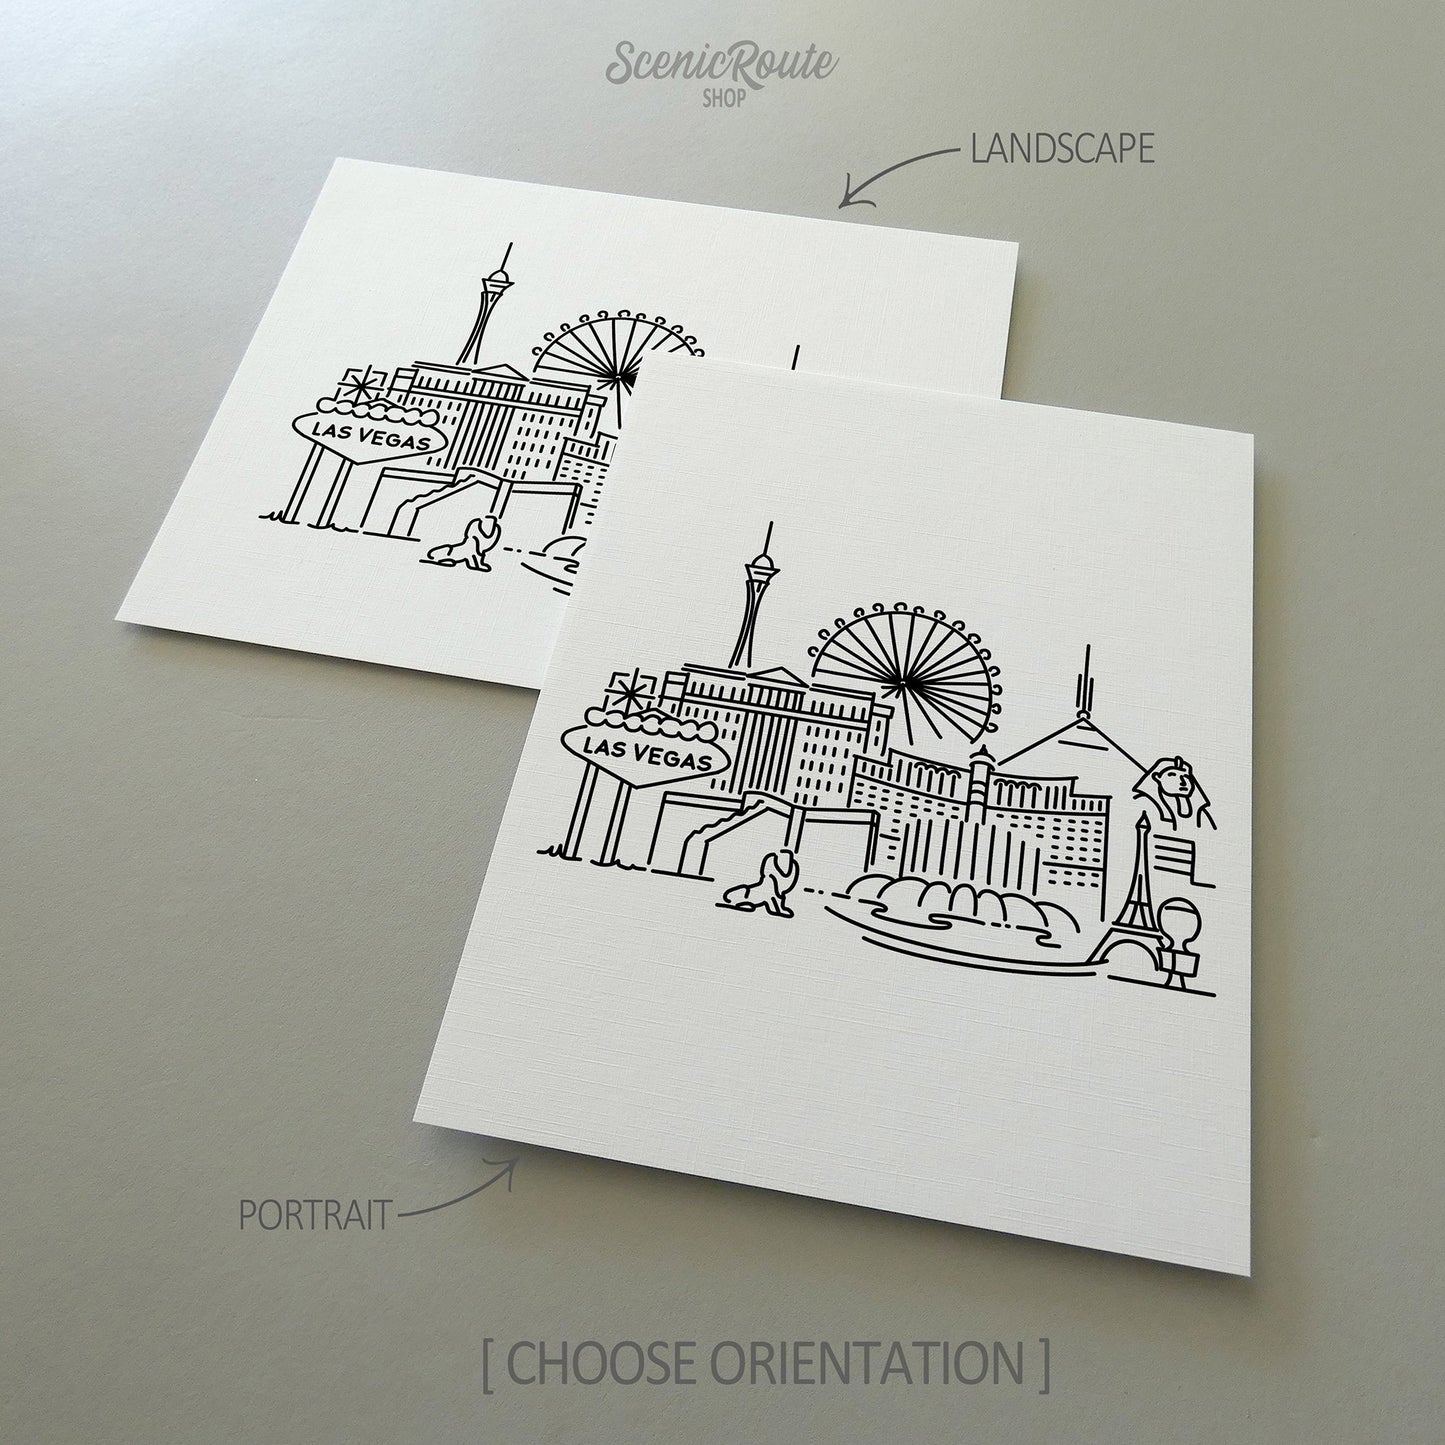 Two line art drawings of the Las Vegas Skyline on white linen paper with a gray background.  The pieces are shown in portrait and landscape orientation for the available art print options.